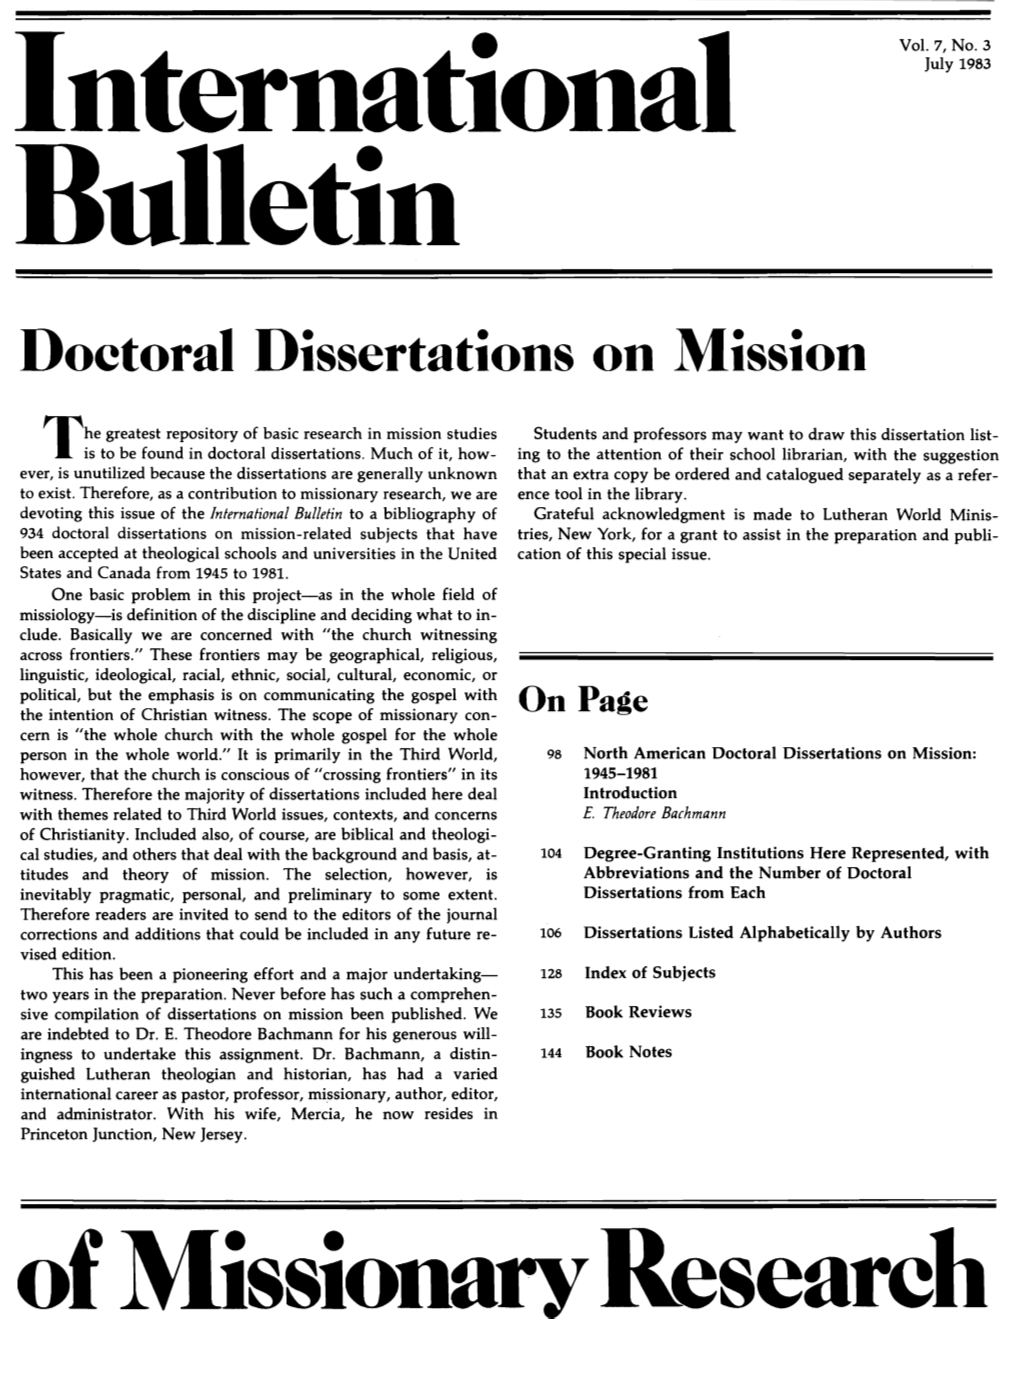 Issionaryresearch North American Doctoral Dissertations on Mission: 1945-1981